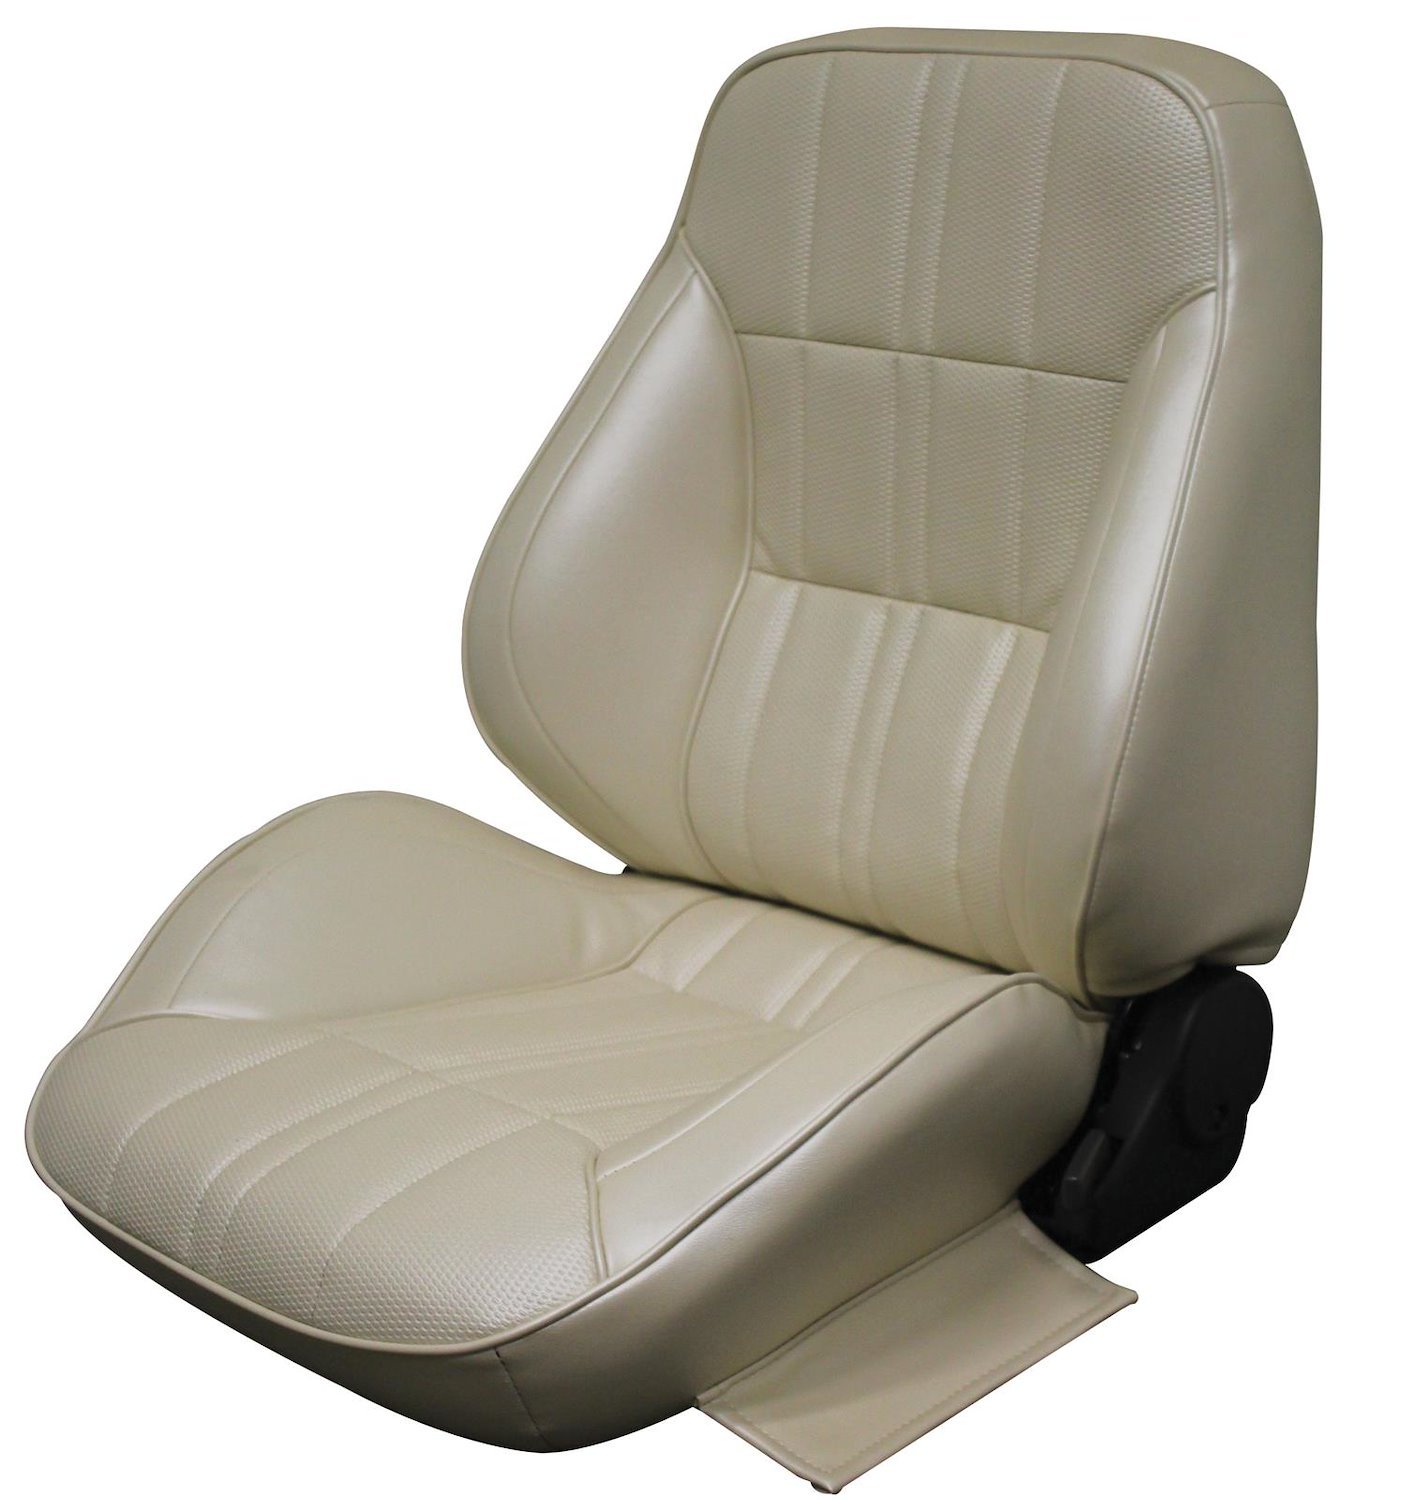 1971-1973 Ford Mustang Deluxe and Grande Interior Black Touring II Preassembled Reclining Front Bucket Seats